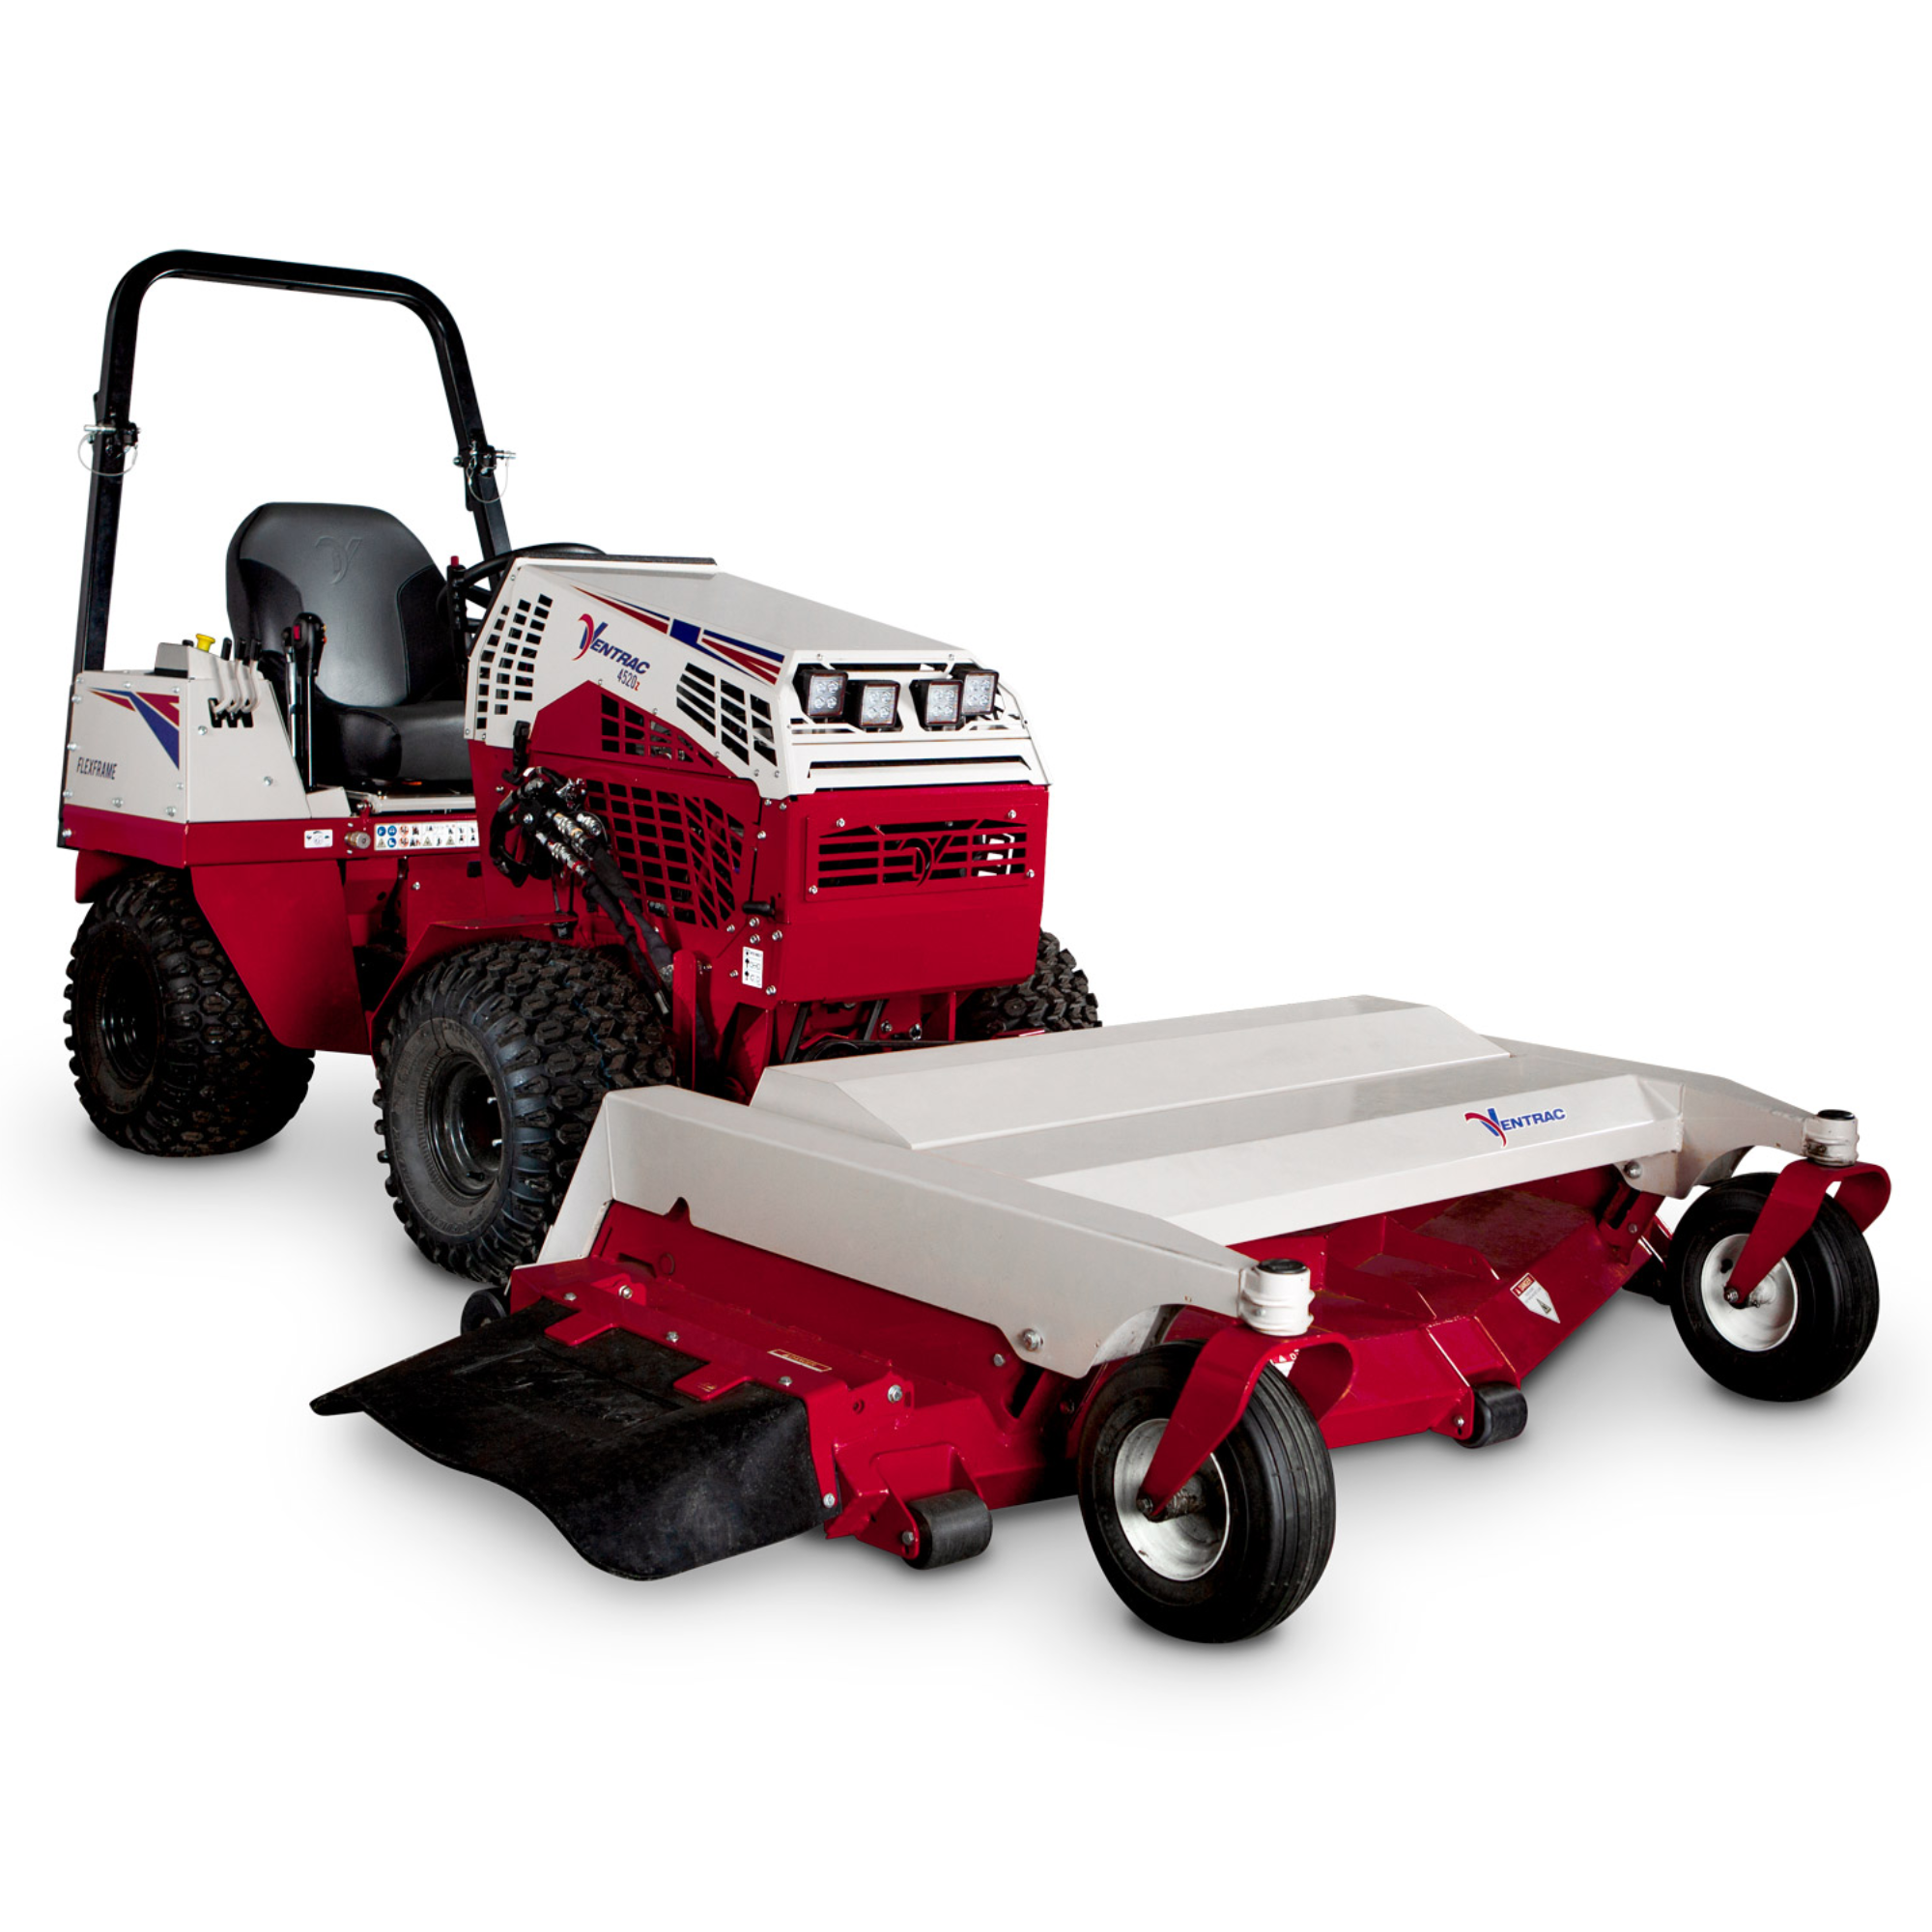 Ventrac MS720 Side Discharge Finish Mower Attachment | 39.55111